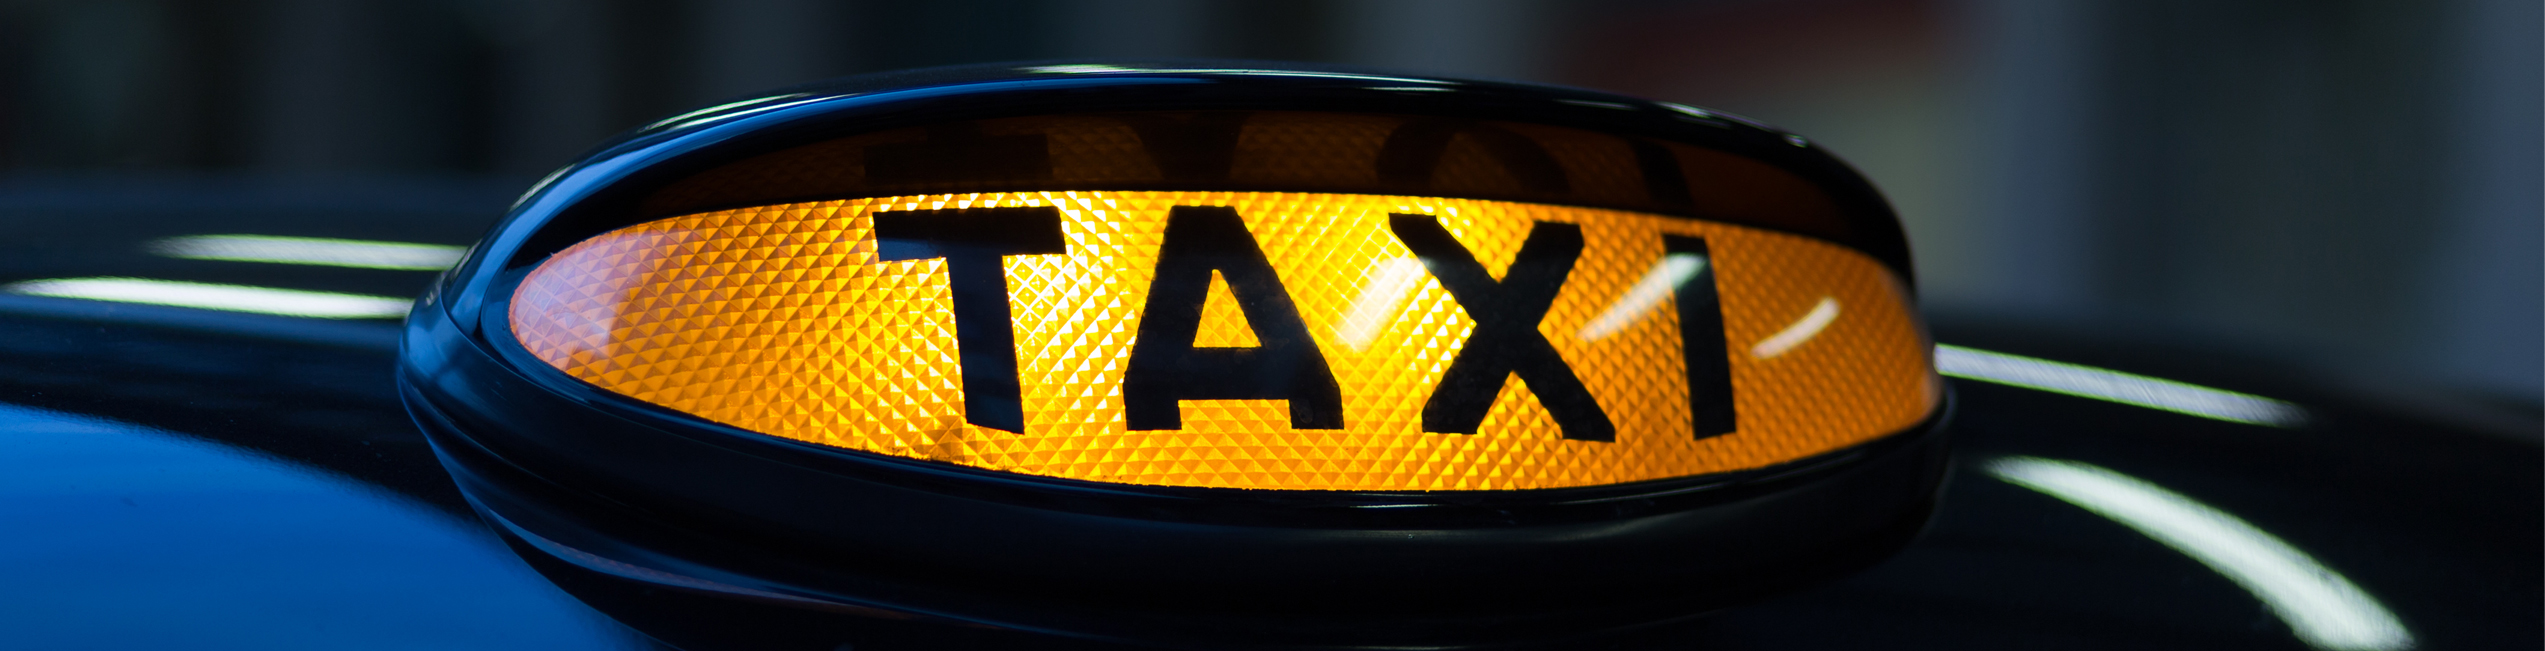 Up close picture of a black cab taxi sign